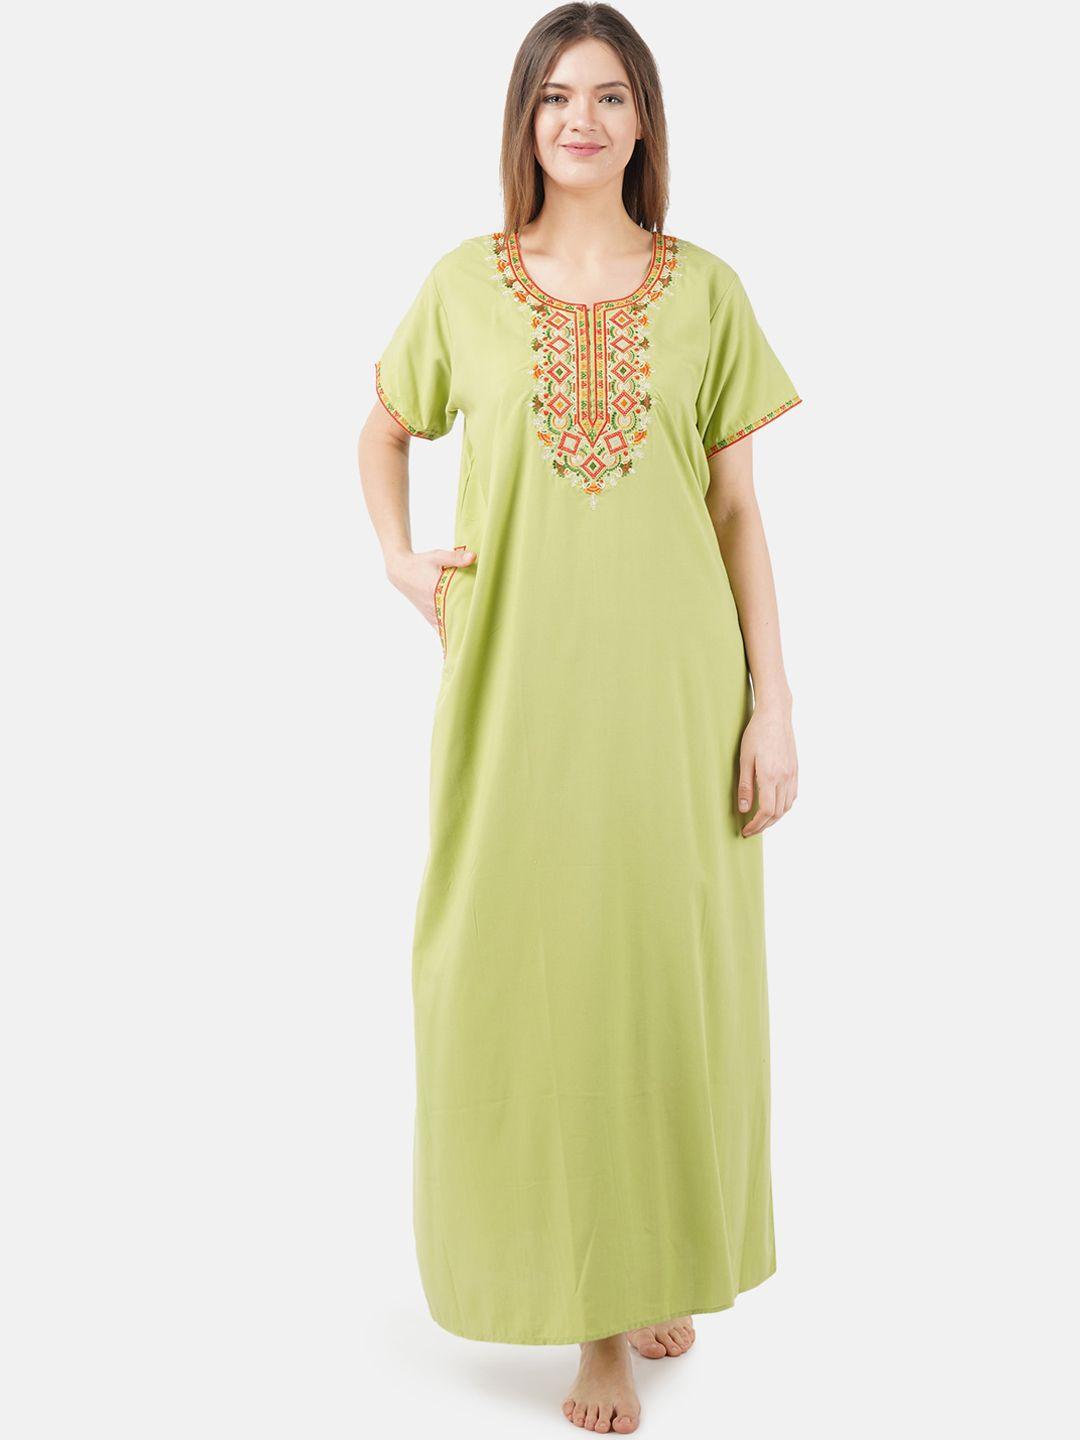 koi-sleepwear-lime-green-&-red-embroidered-cotton-nightdress